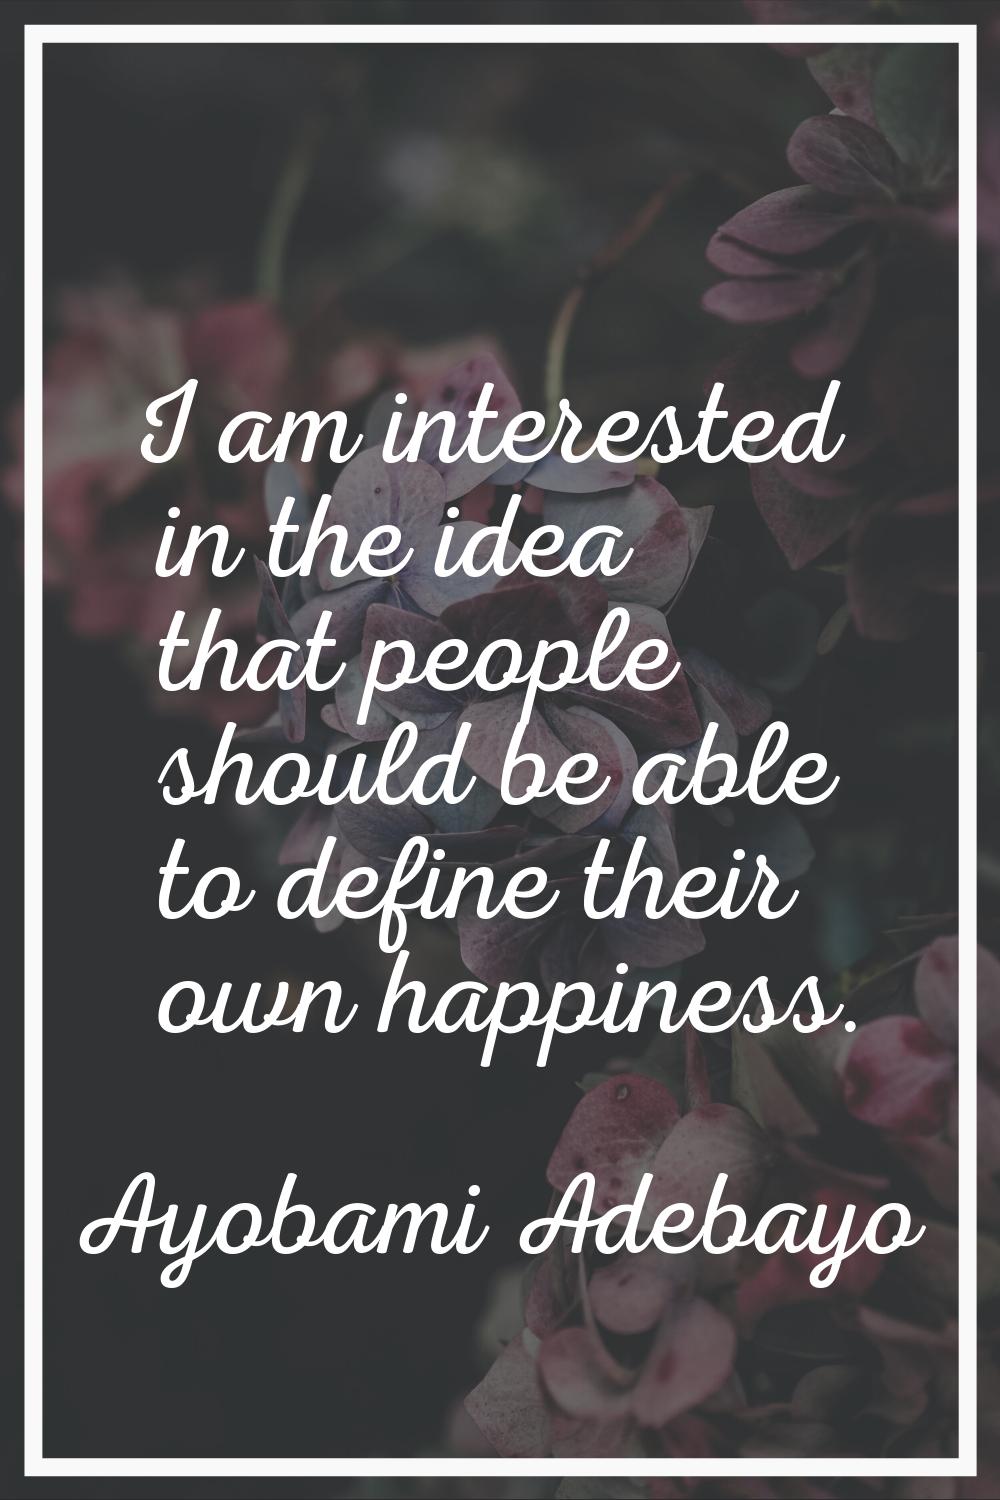 I am interested in the idea that people should be able to define their own happiness.